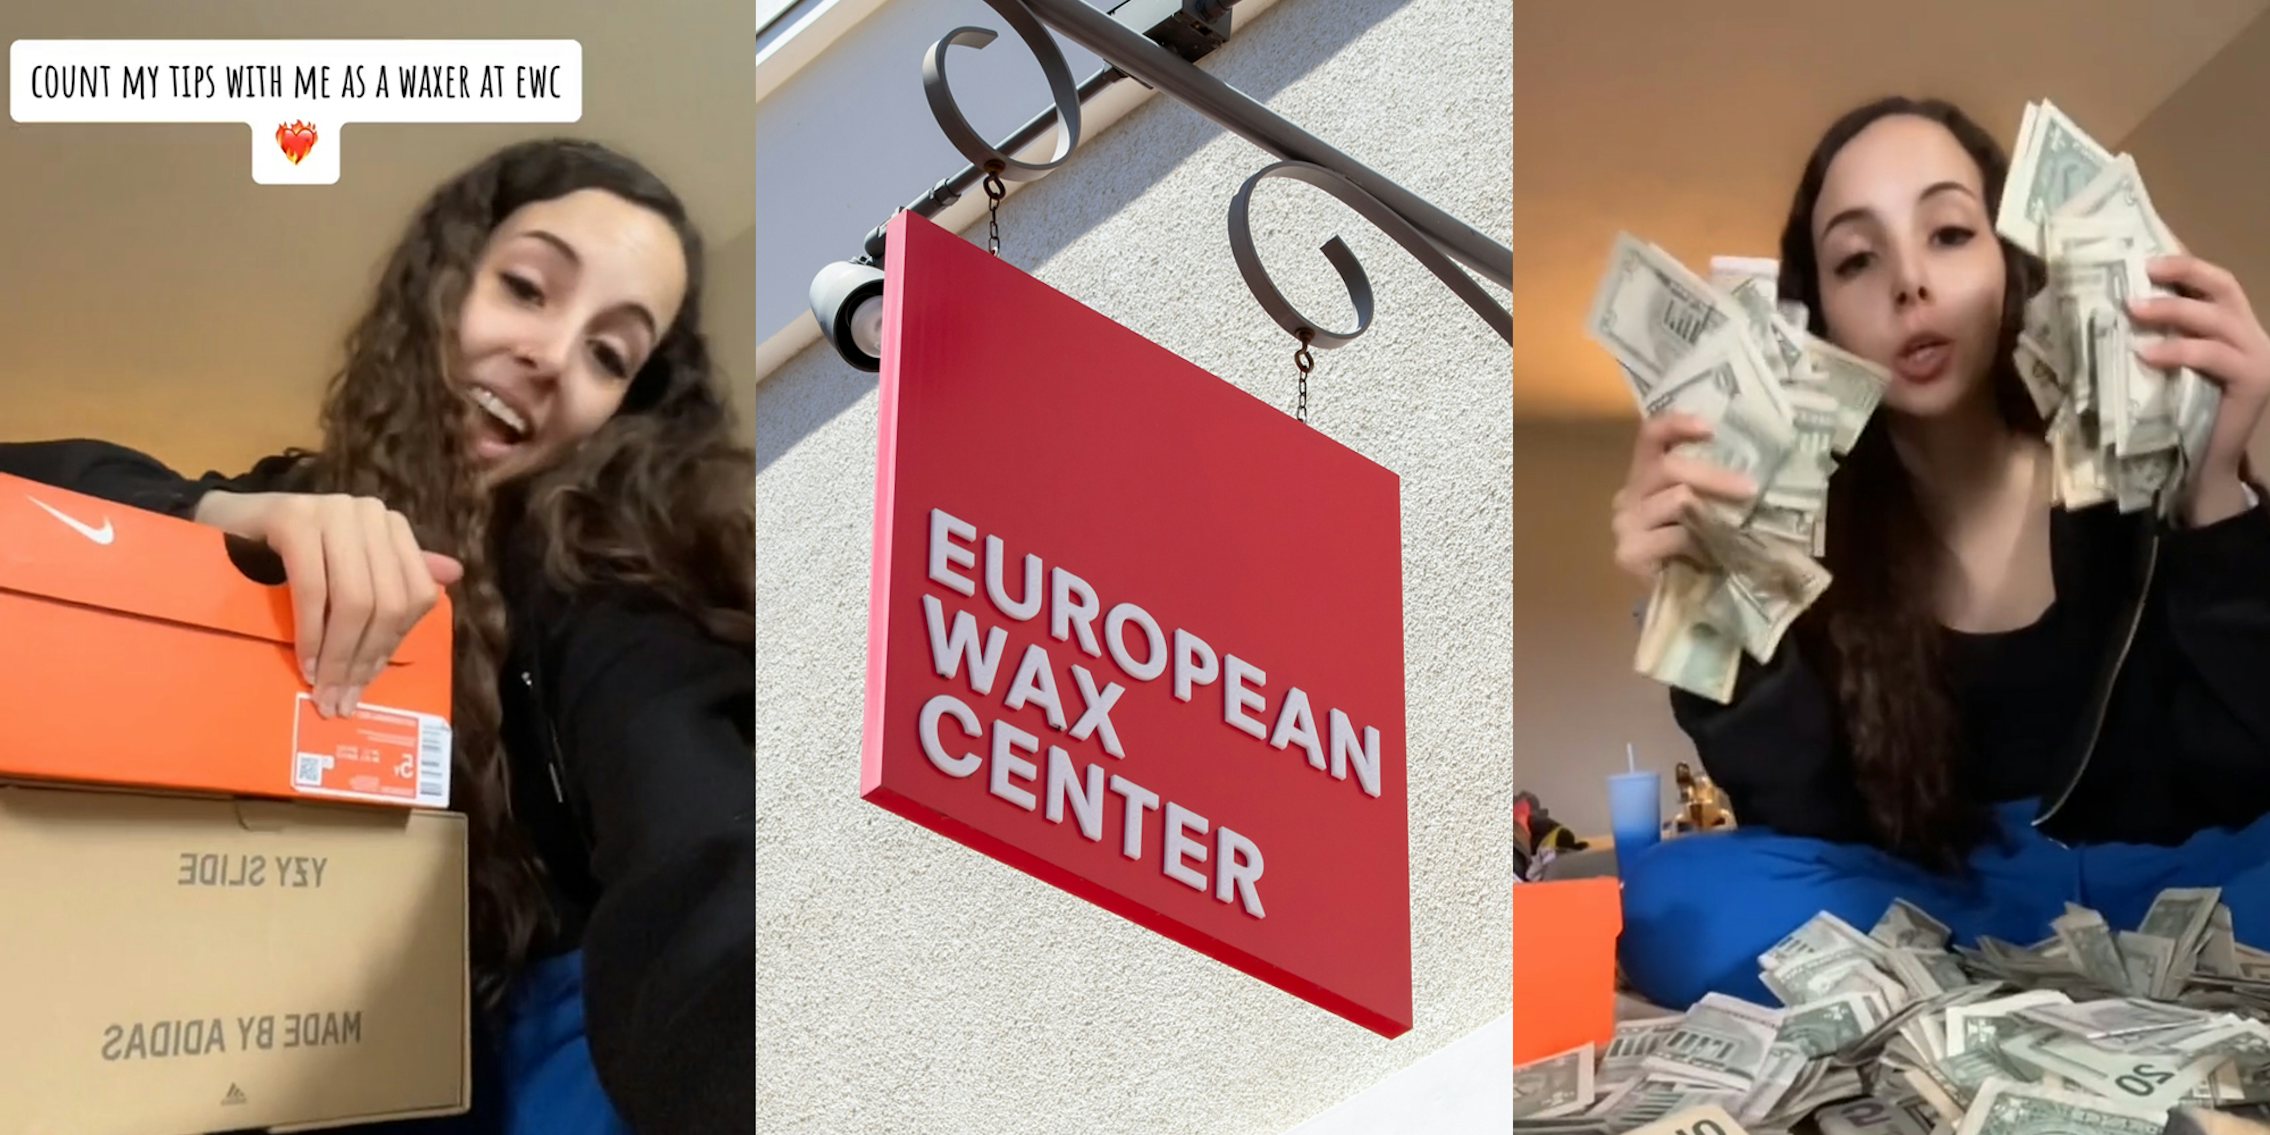 EWC former employee speaking with caption 'Count my tips with me as a waxwe at EWC' (l) European Wax Center sign hanging on building (c) former EWC employee speaking holding cash above pile of cash (r)